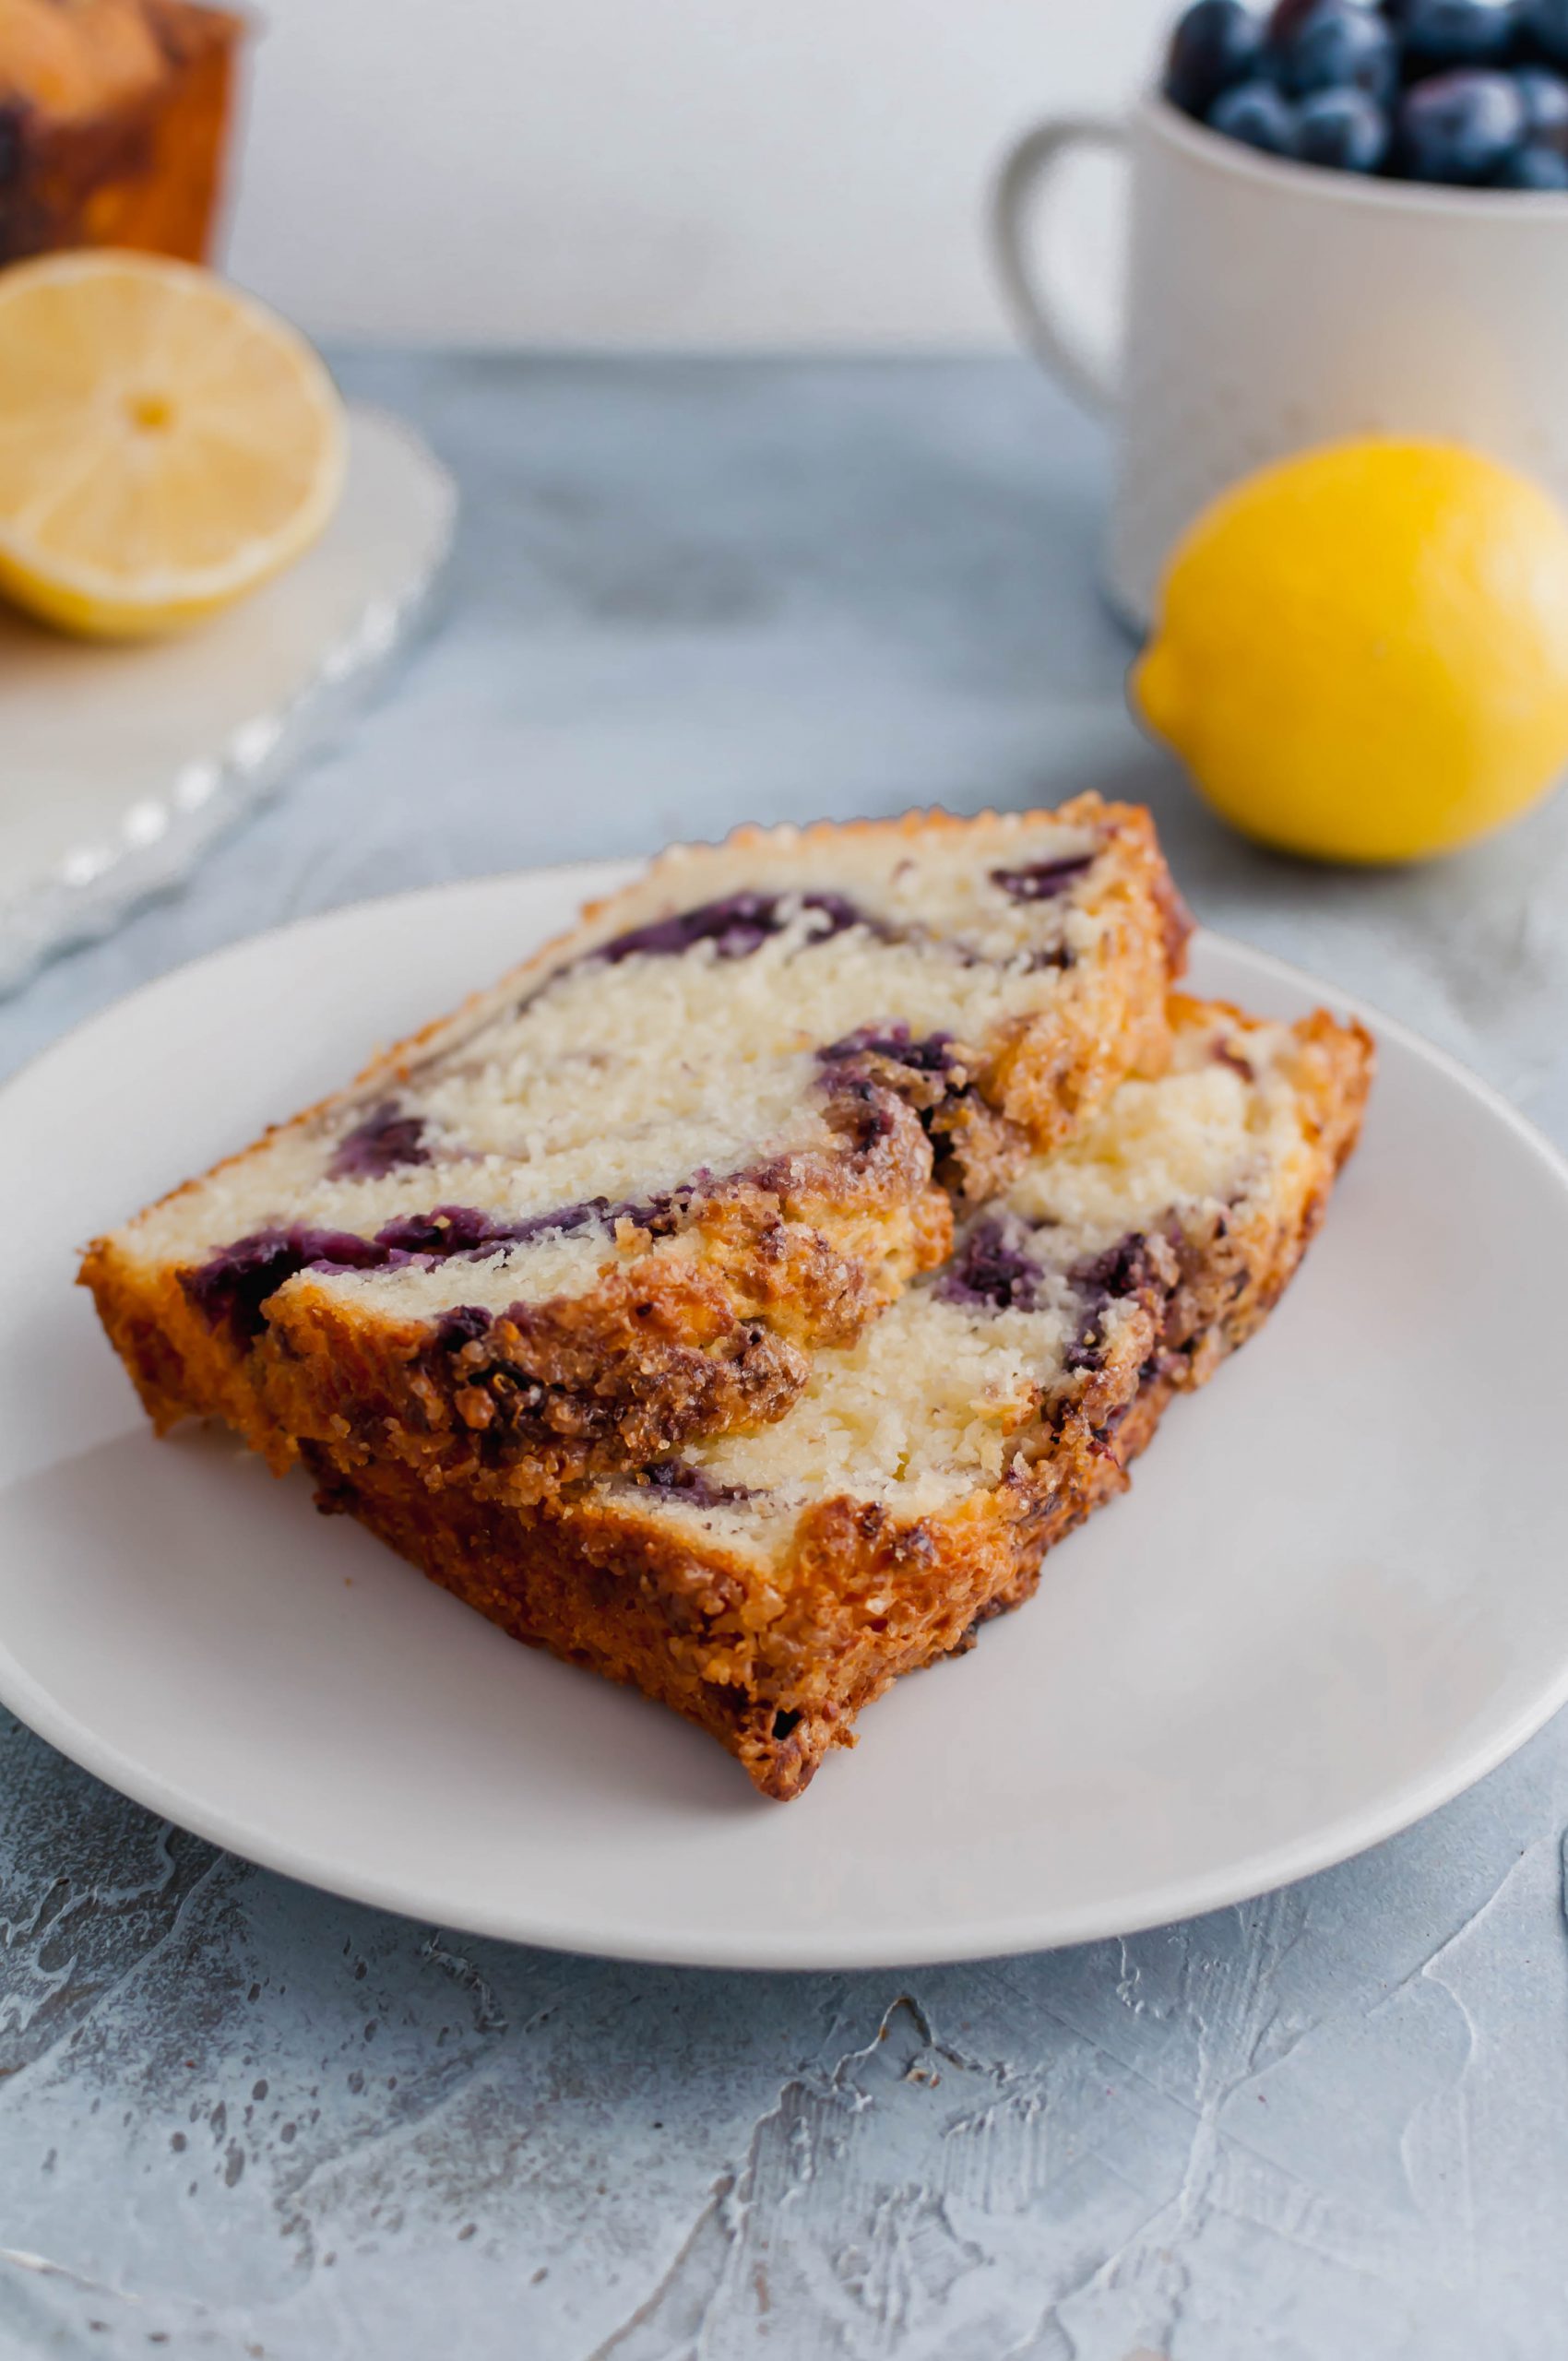 Blueberry Bread is a delicious breakfast option. Tender, moist quick bread swirled with homemade blueberry compote and topped with lemon sugar